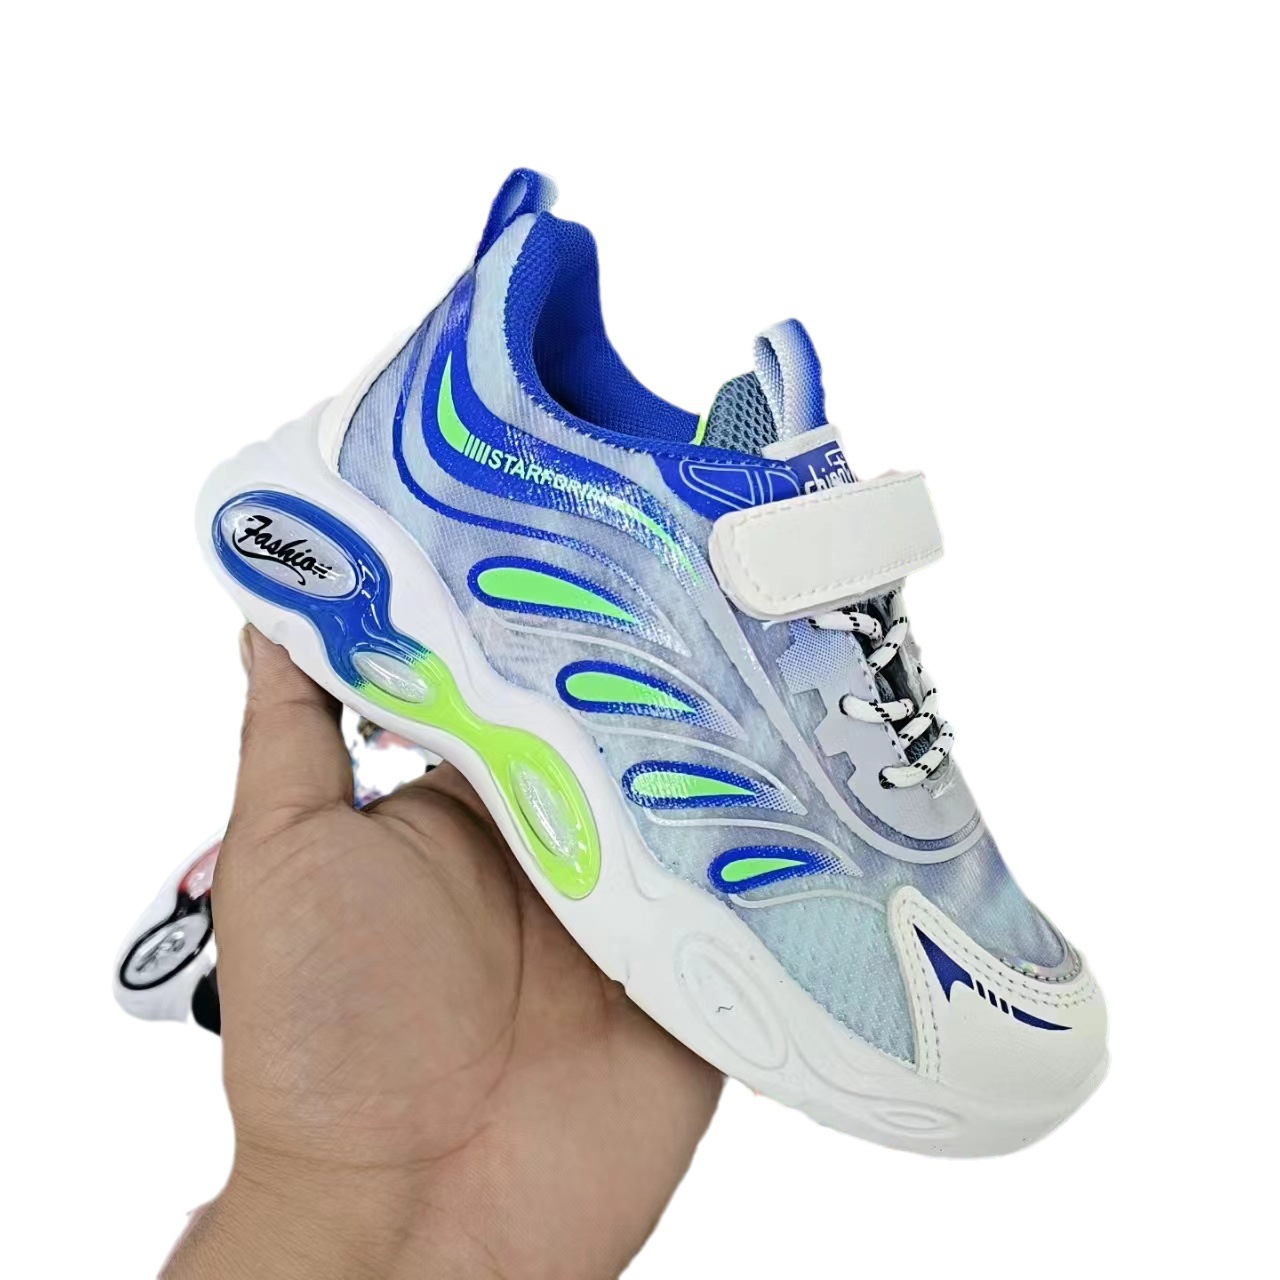 Children's Sneaker Medium and Large Children's Casual Mesh Shoes Running Shoes Tail Goods Foreign Trade Wholesale Children's Shoes